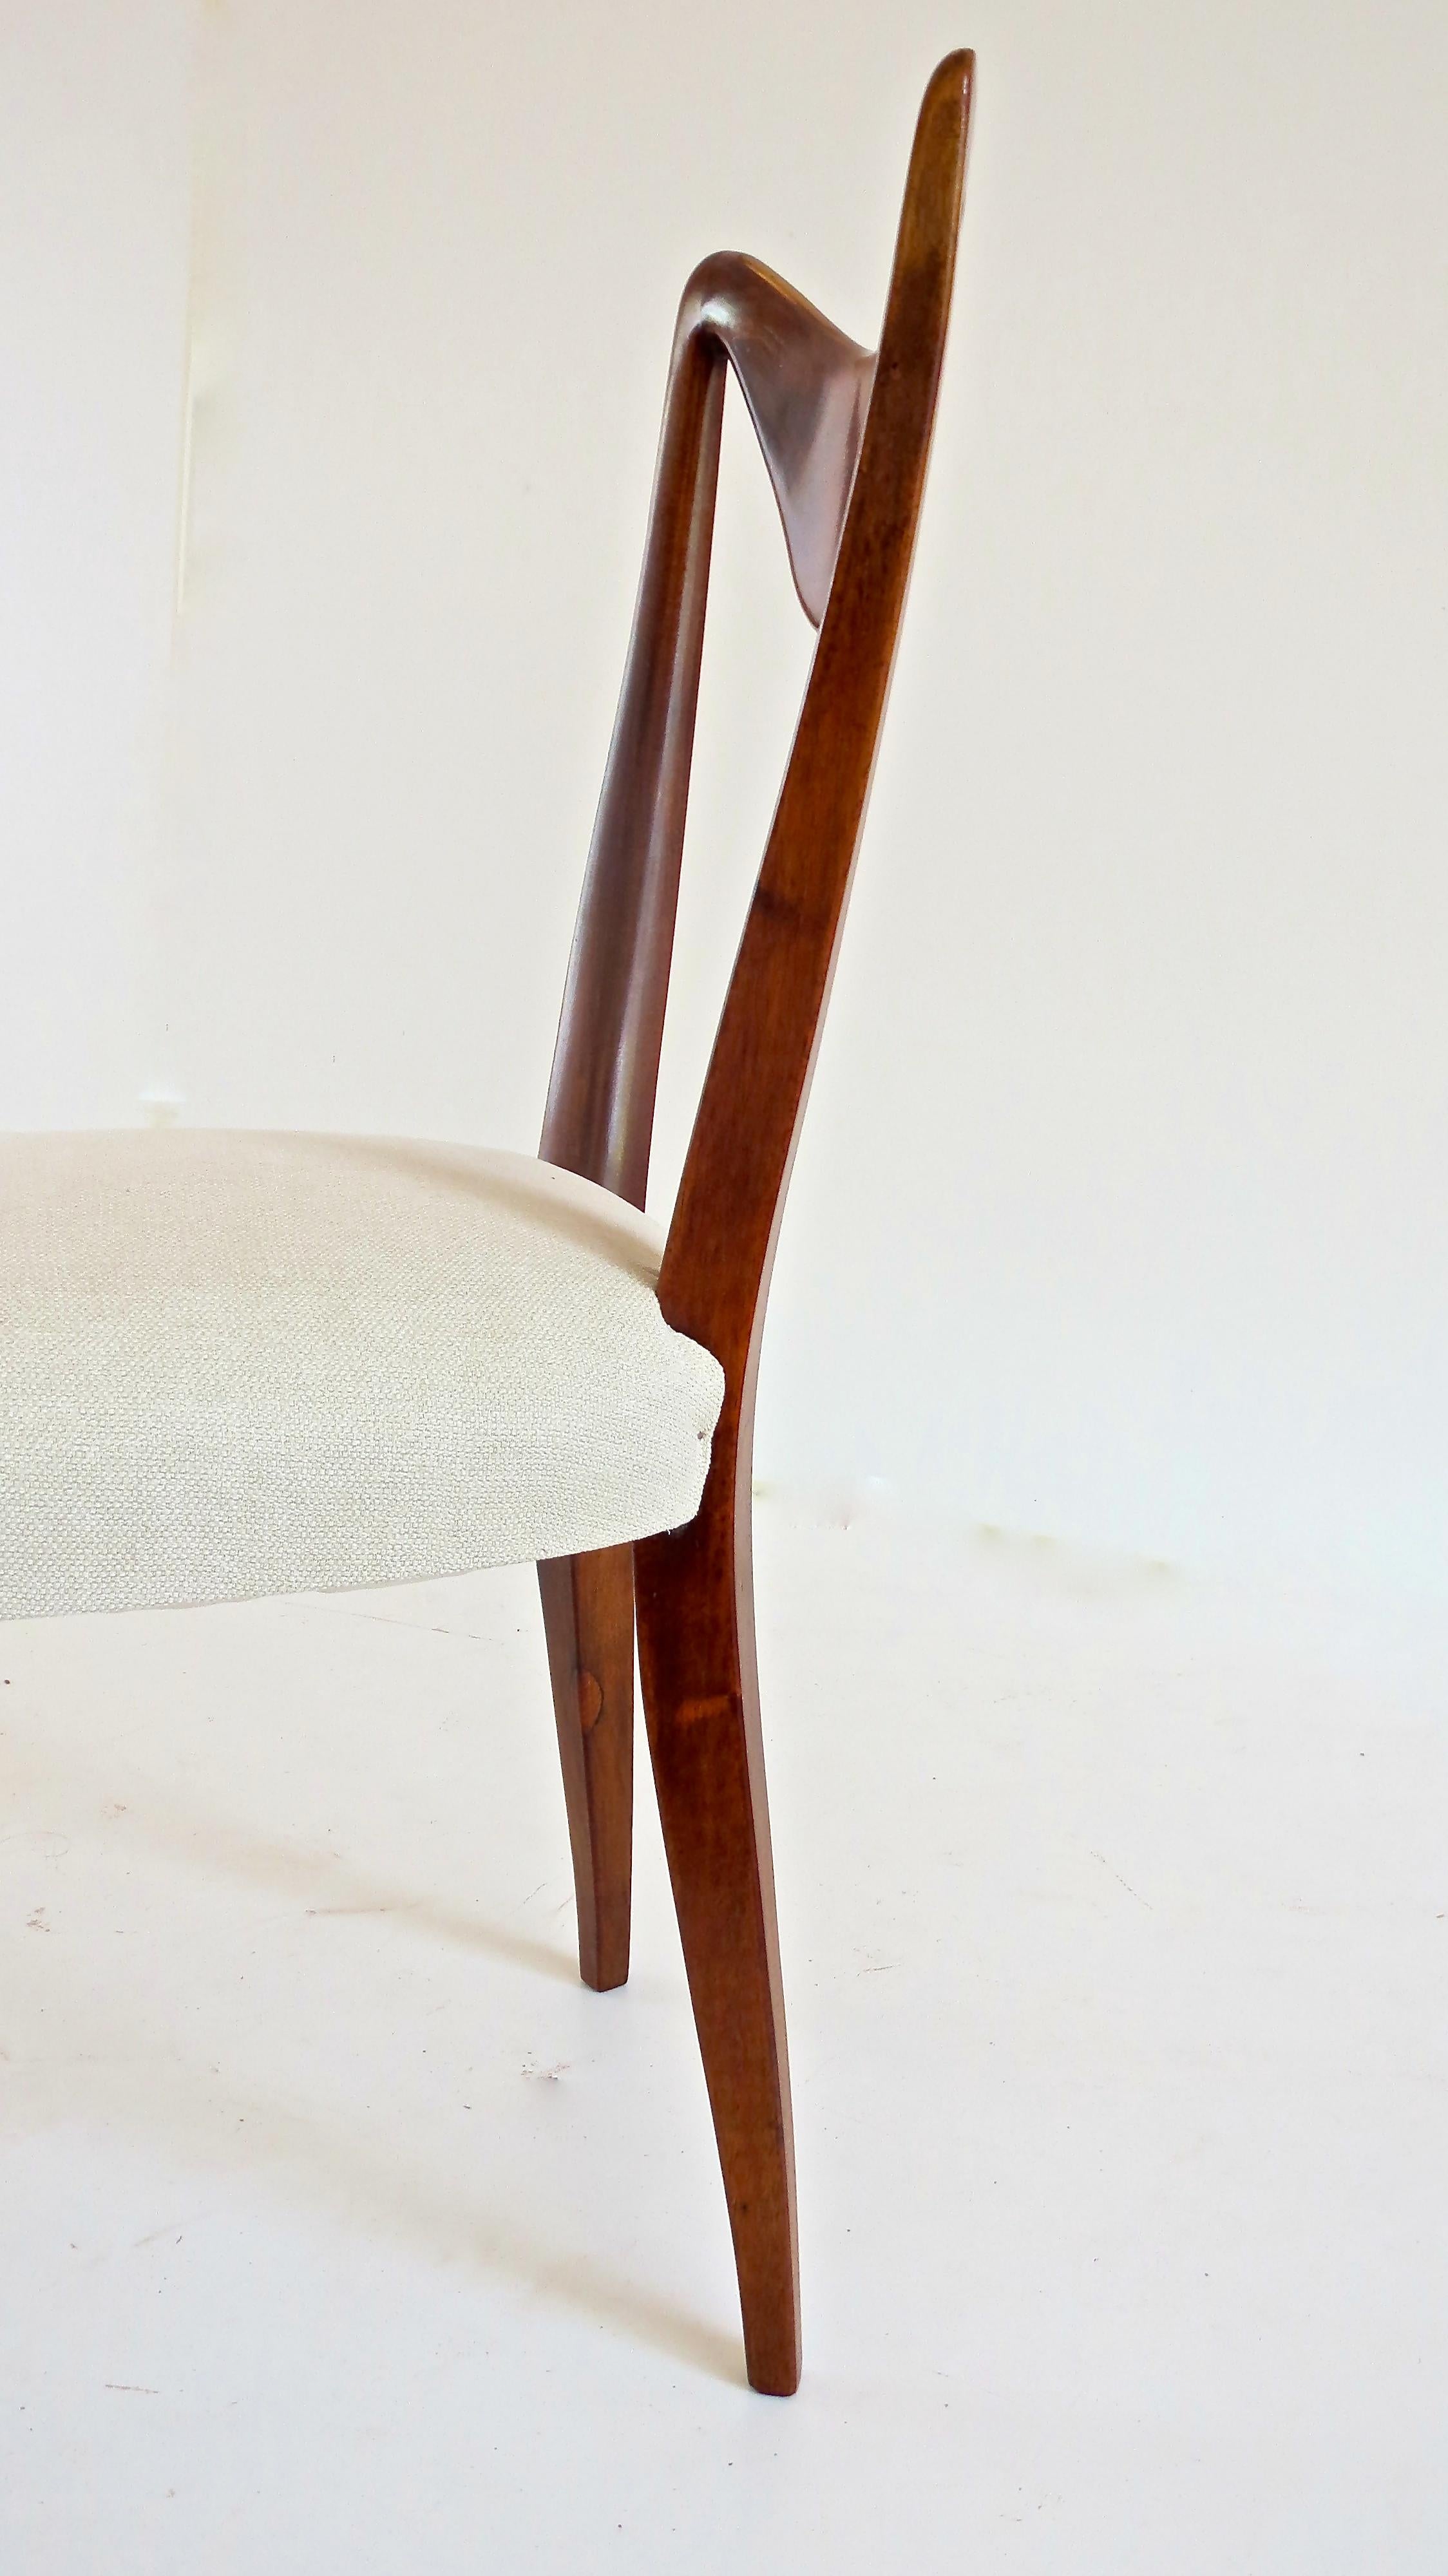 Mid-20th Century Set of Seven Walnut Dining Room Chairs by Arch, Carlo Enrico Rava, Milano, 1940